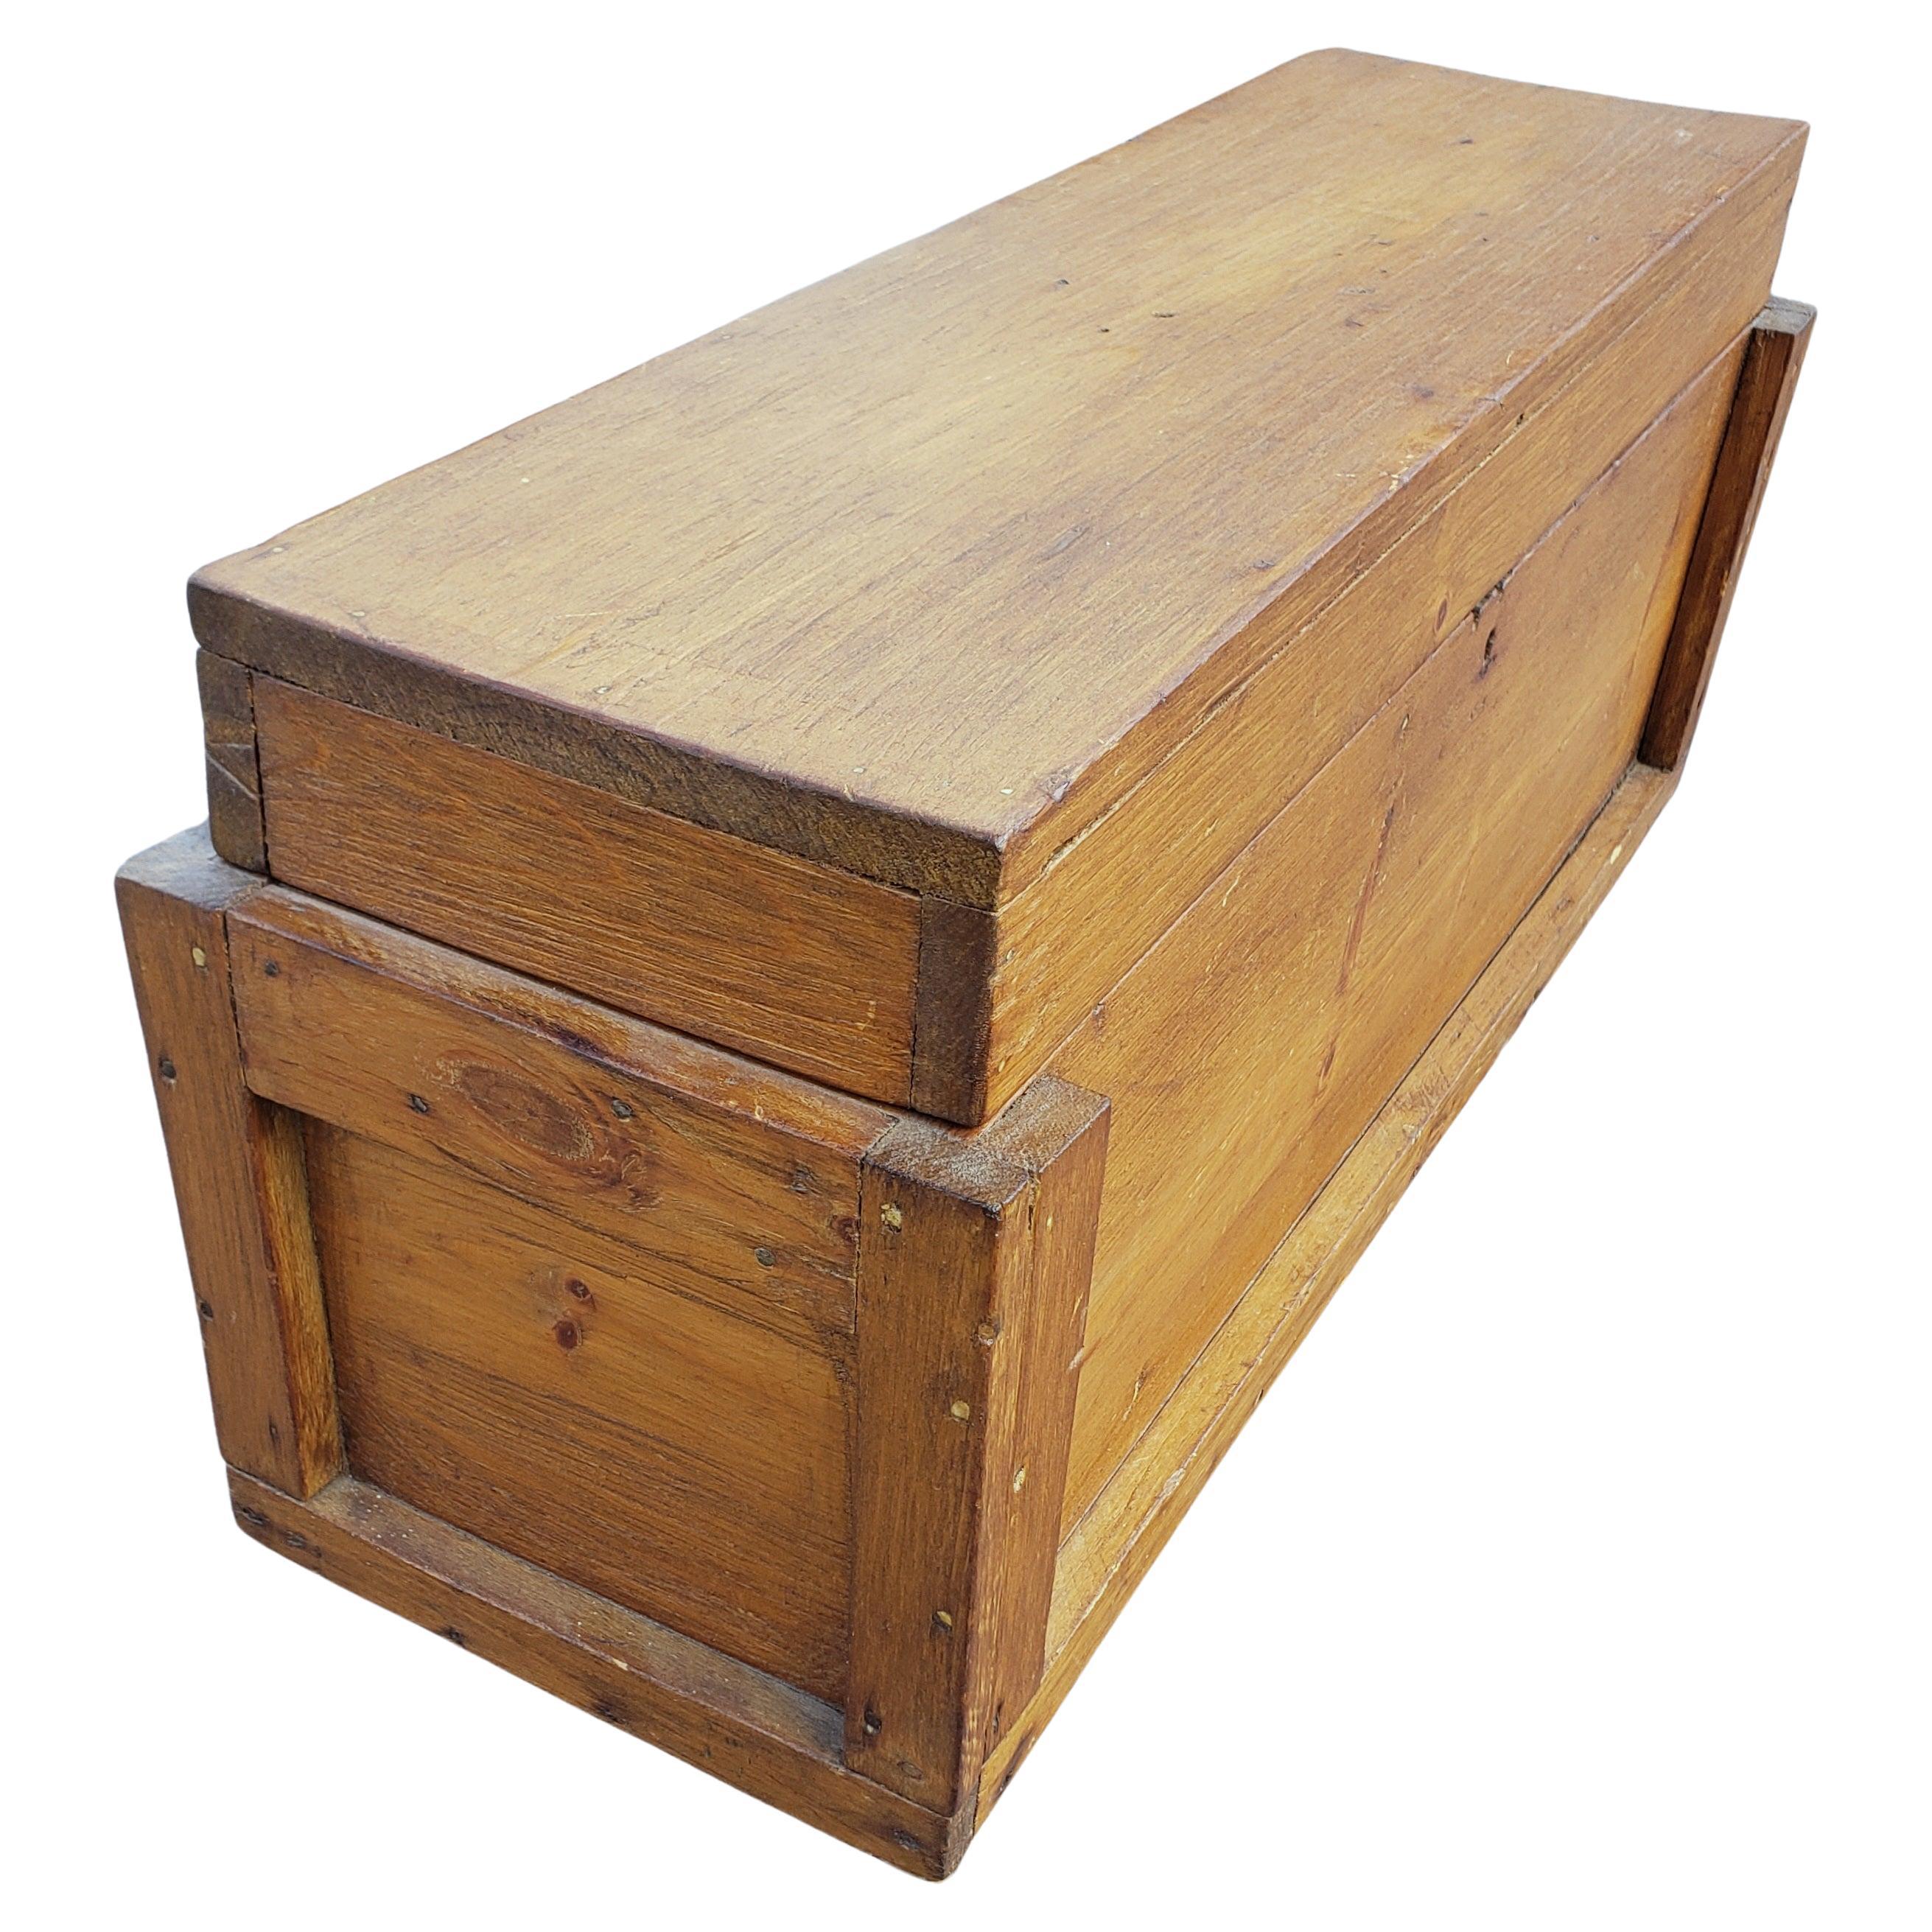 Hardwood Early 20th Century American Primitive Wooden Tool Box For Sale